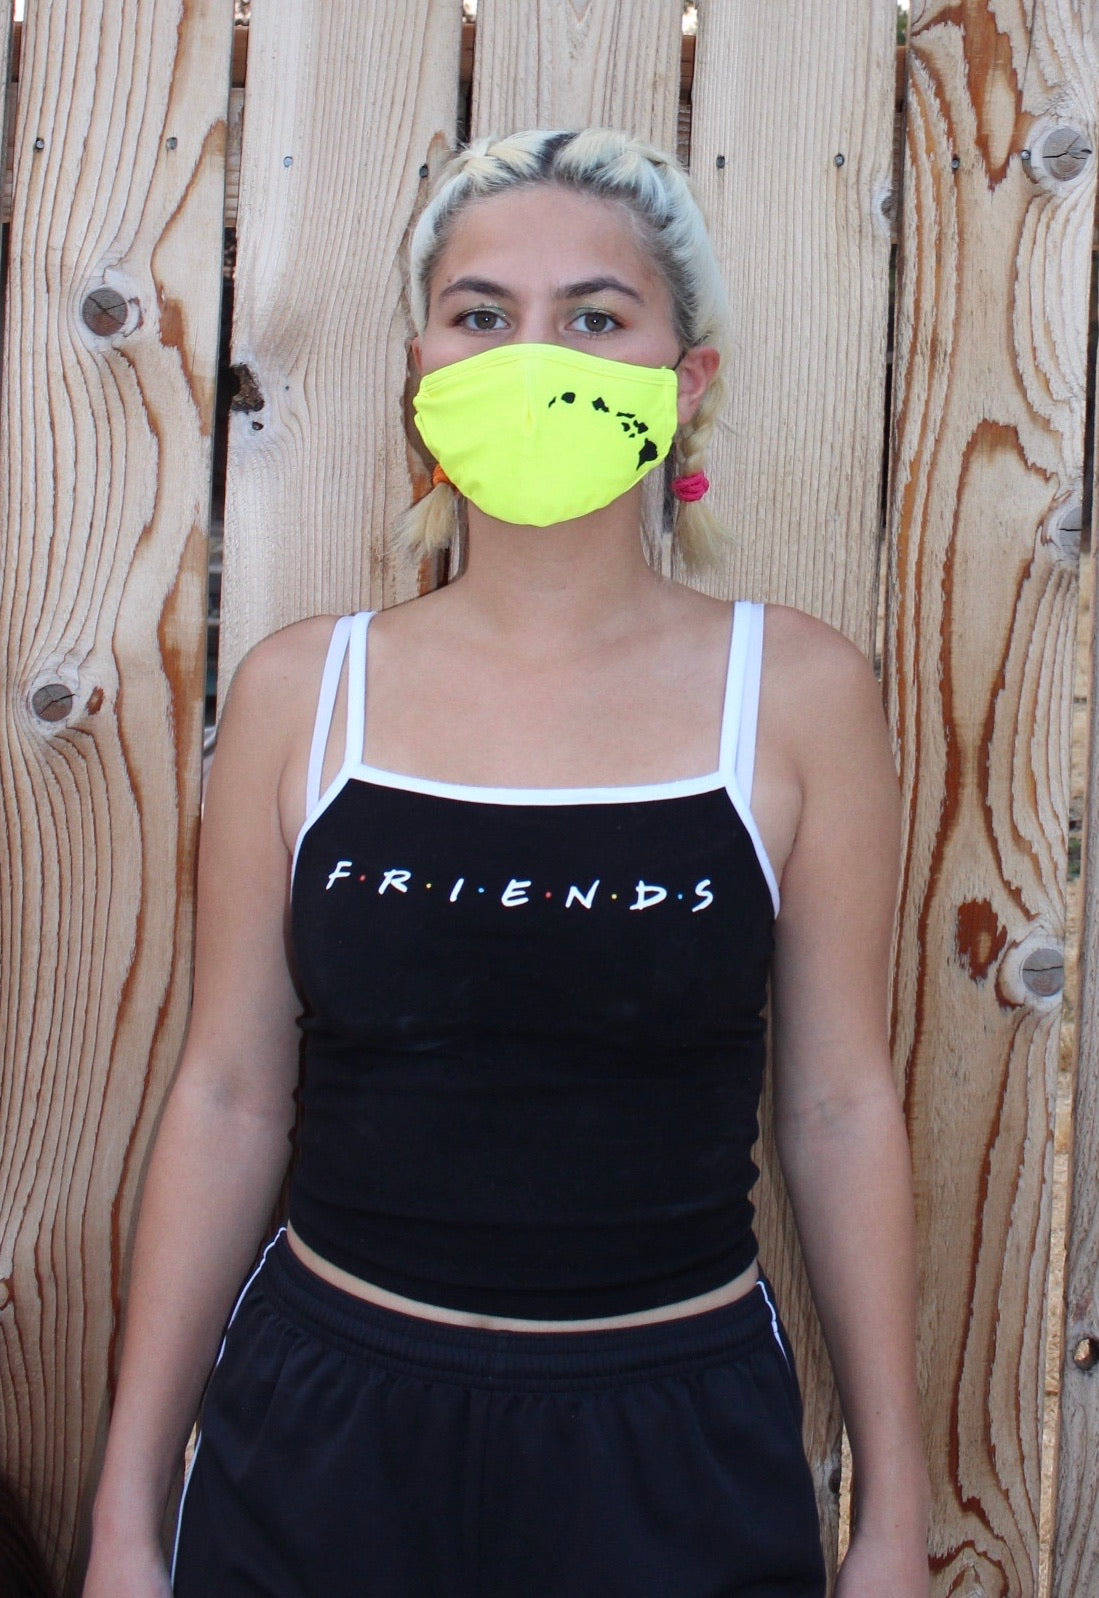 NEON SAFETY COLORS ISLAND CHAIN FACE MASK STRETCH ATHLETIC FABRIC